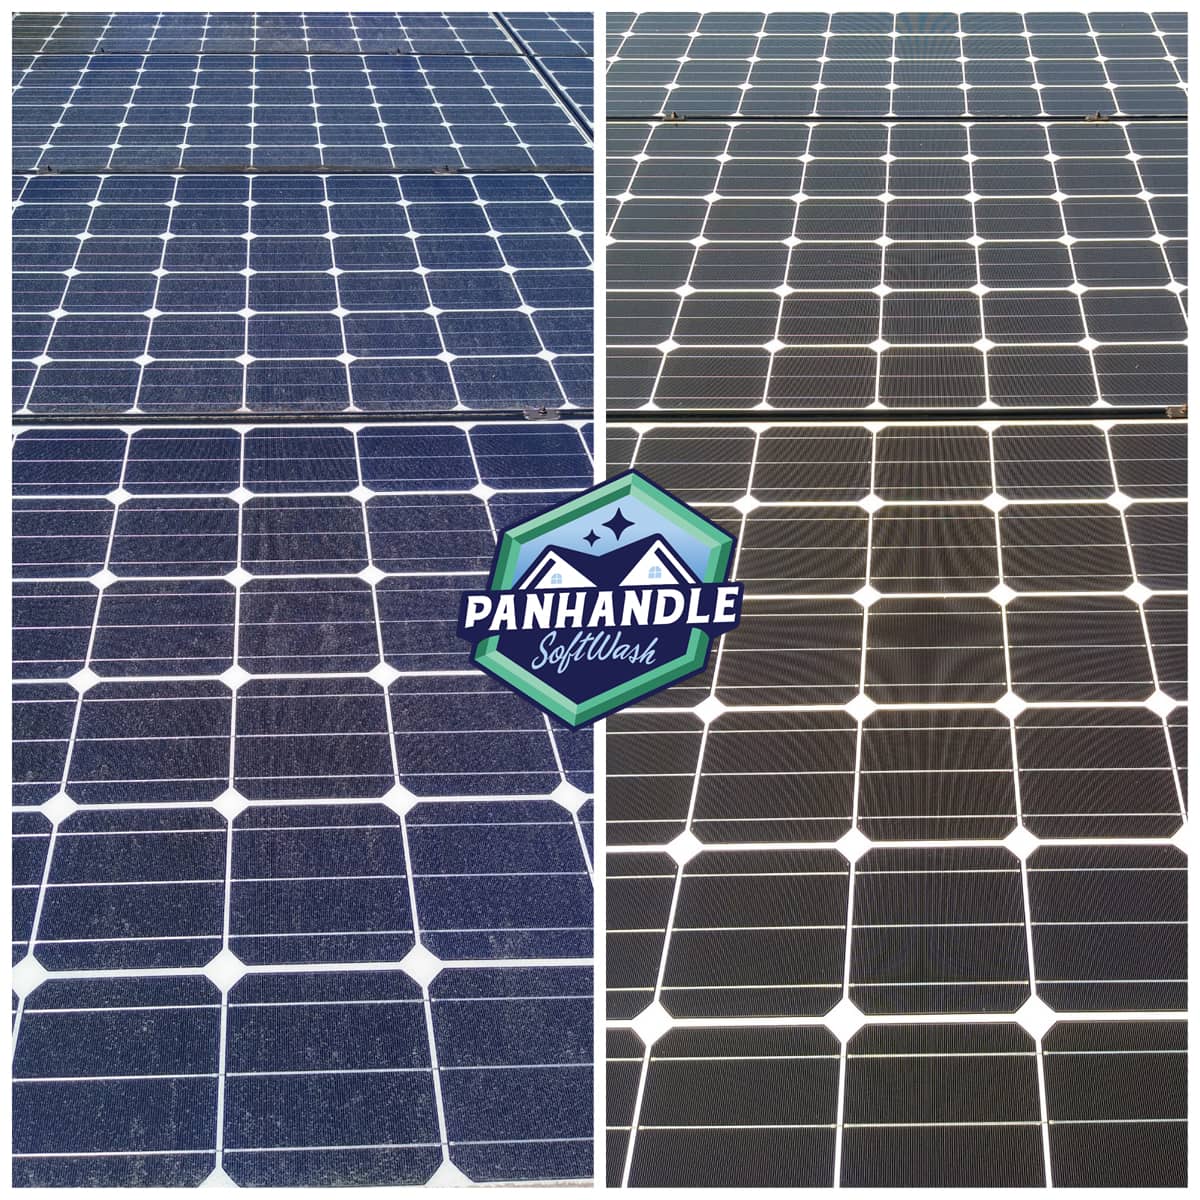 solar panels before and after cleaning